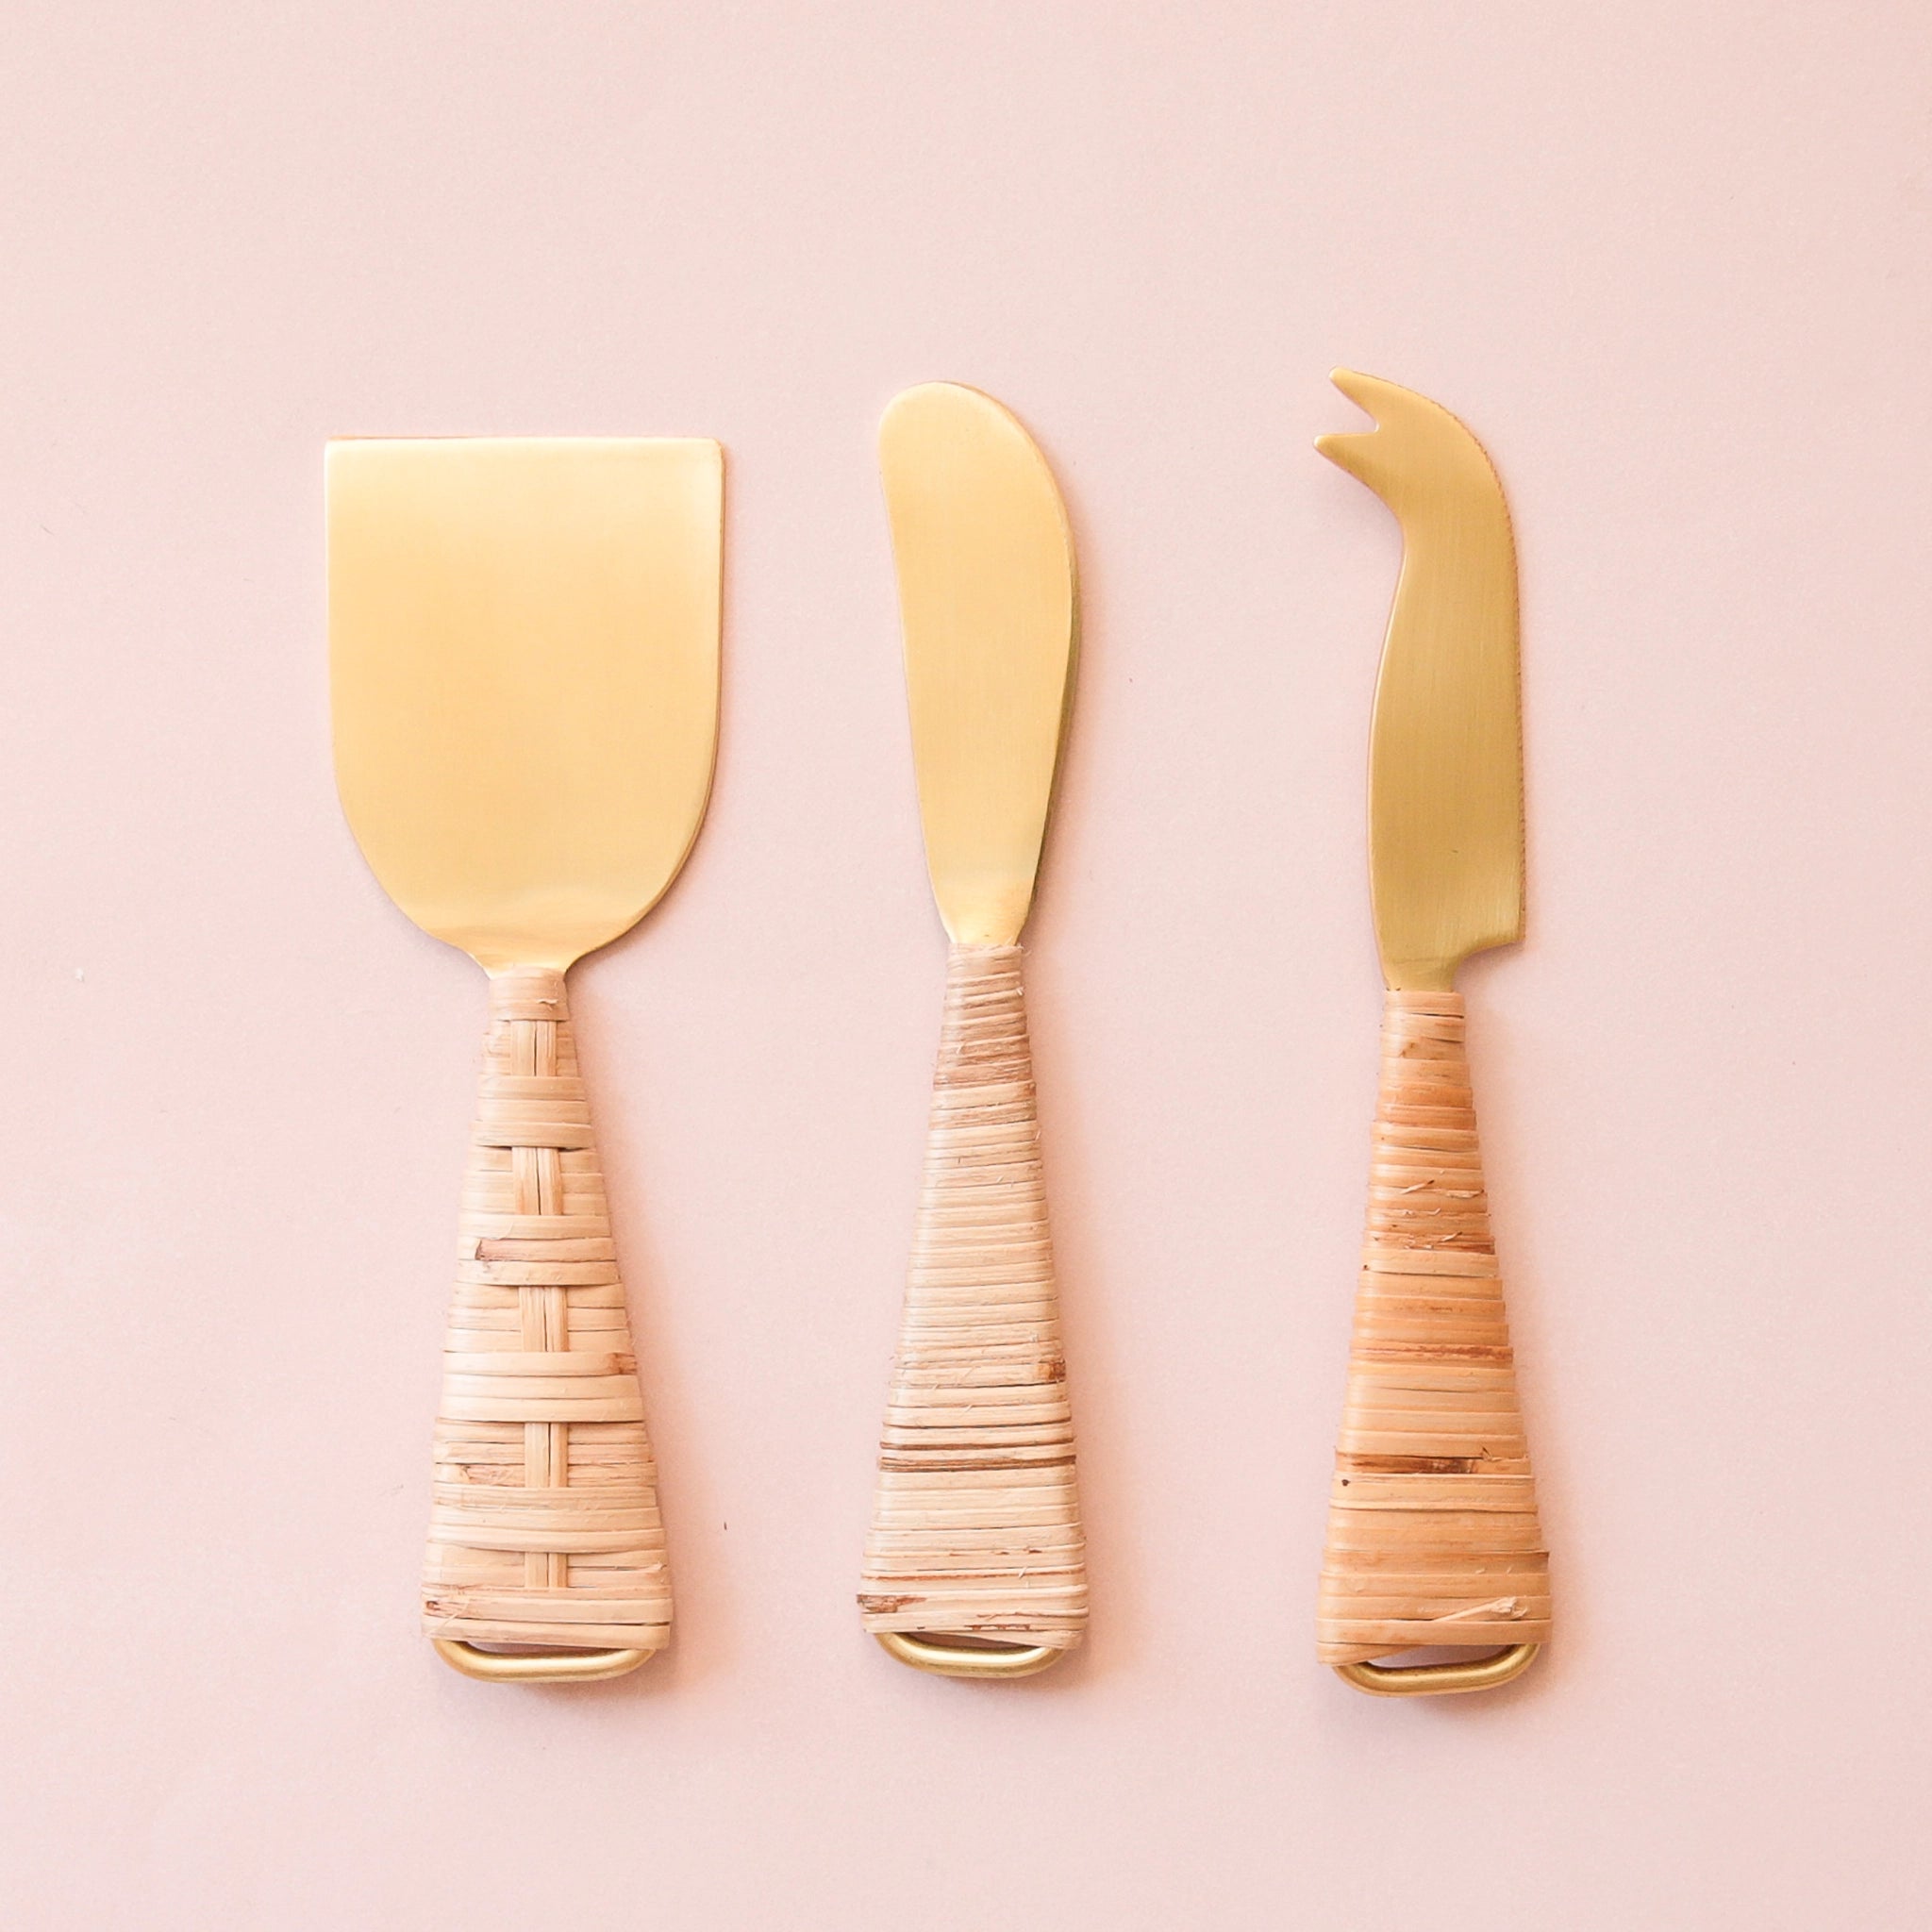 Gold cheese knives wrapped with natural rattan handles. A hatched design is on one side of the knives, while the opposite side is horizontally wrapped.